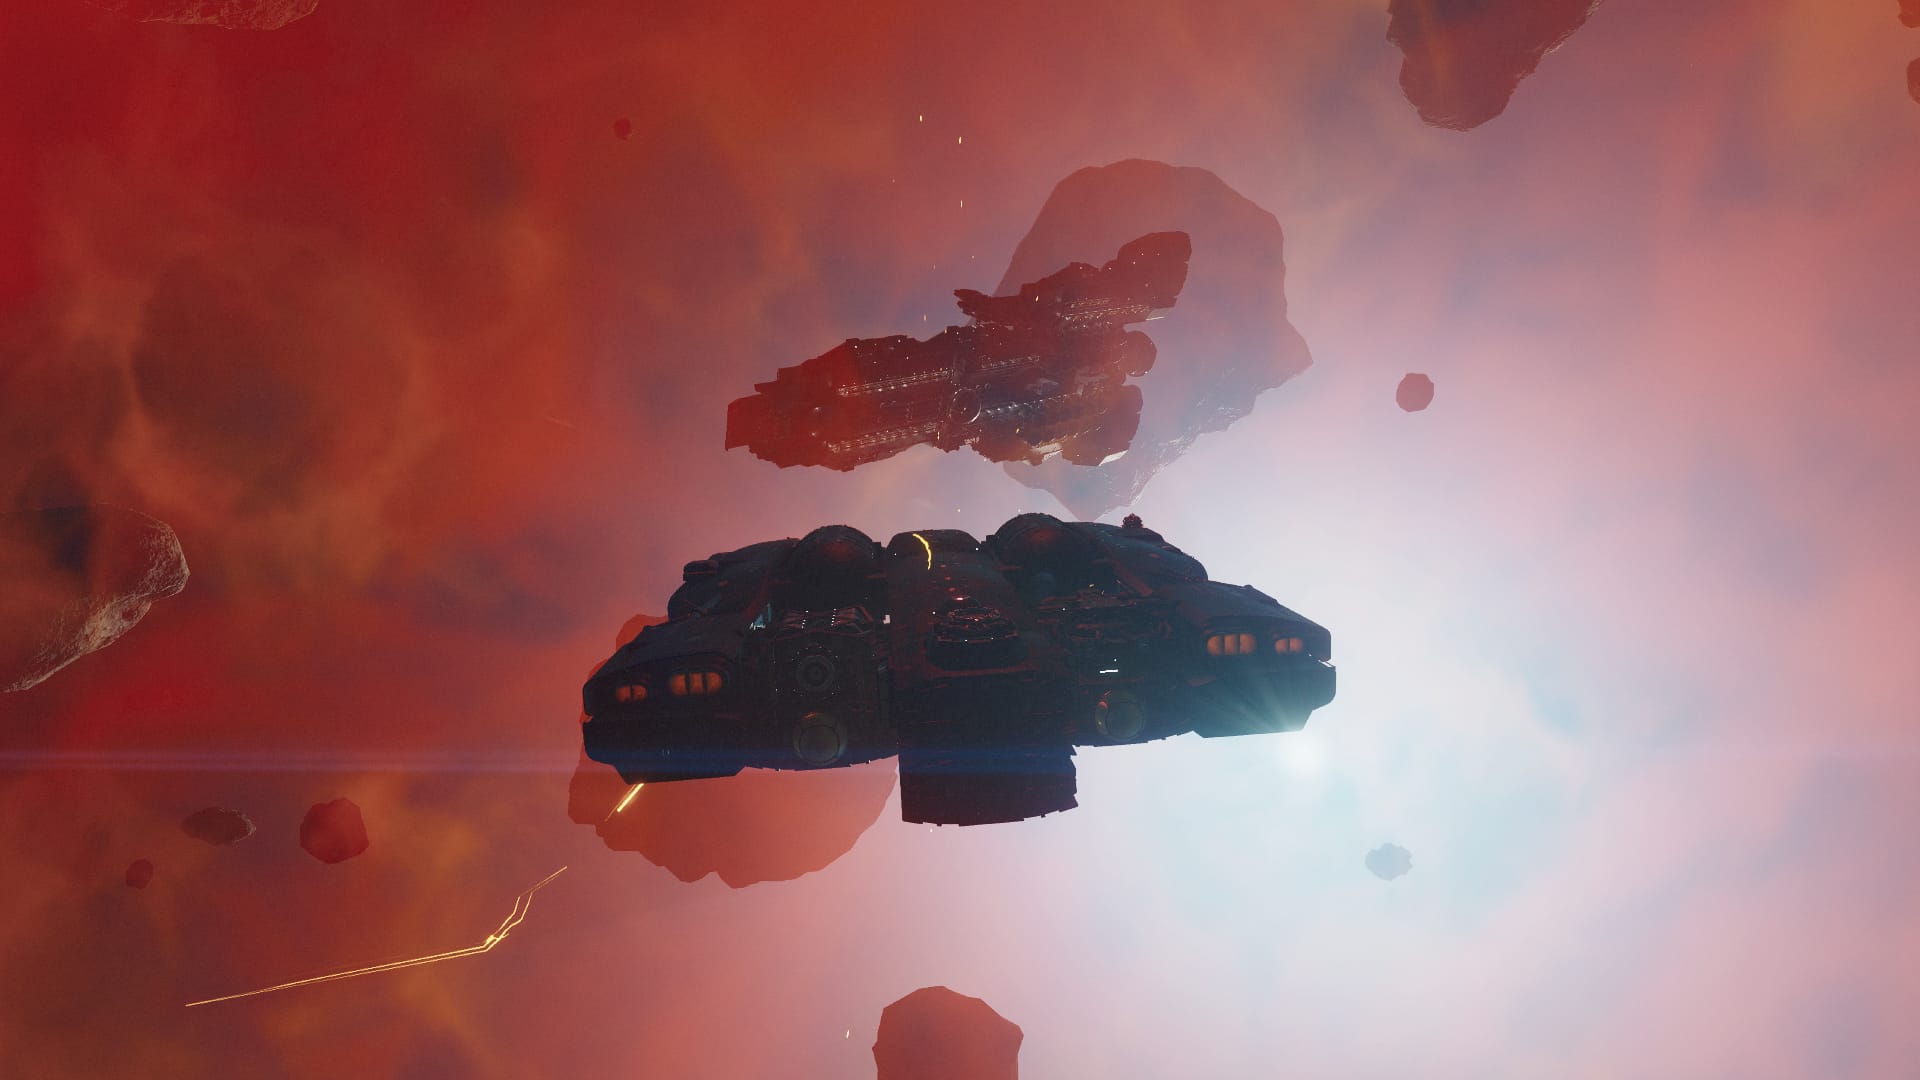 Starfield screenshot of a ship flying through an asteroid-filled red nebula